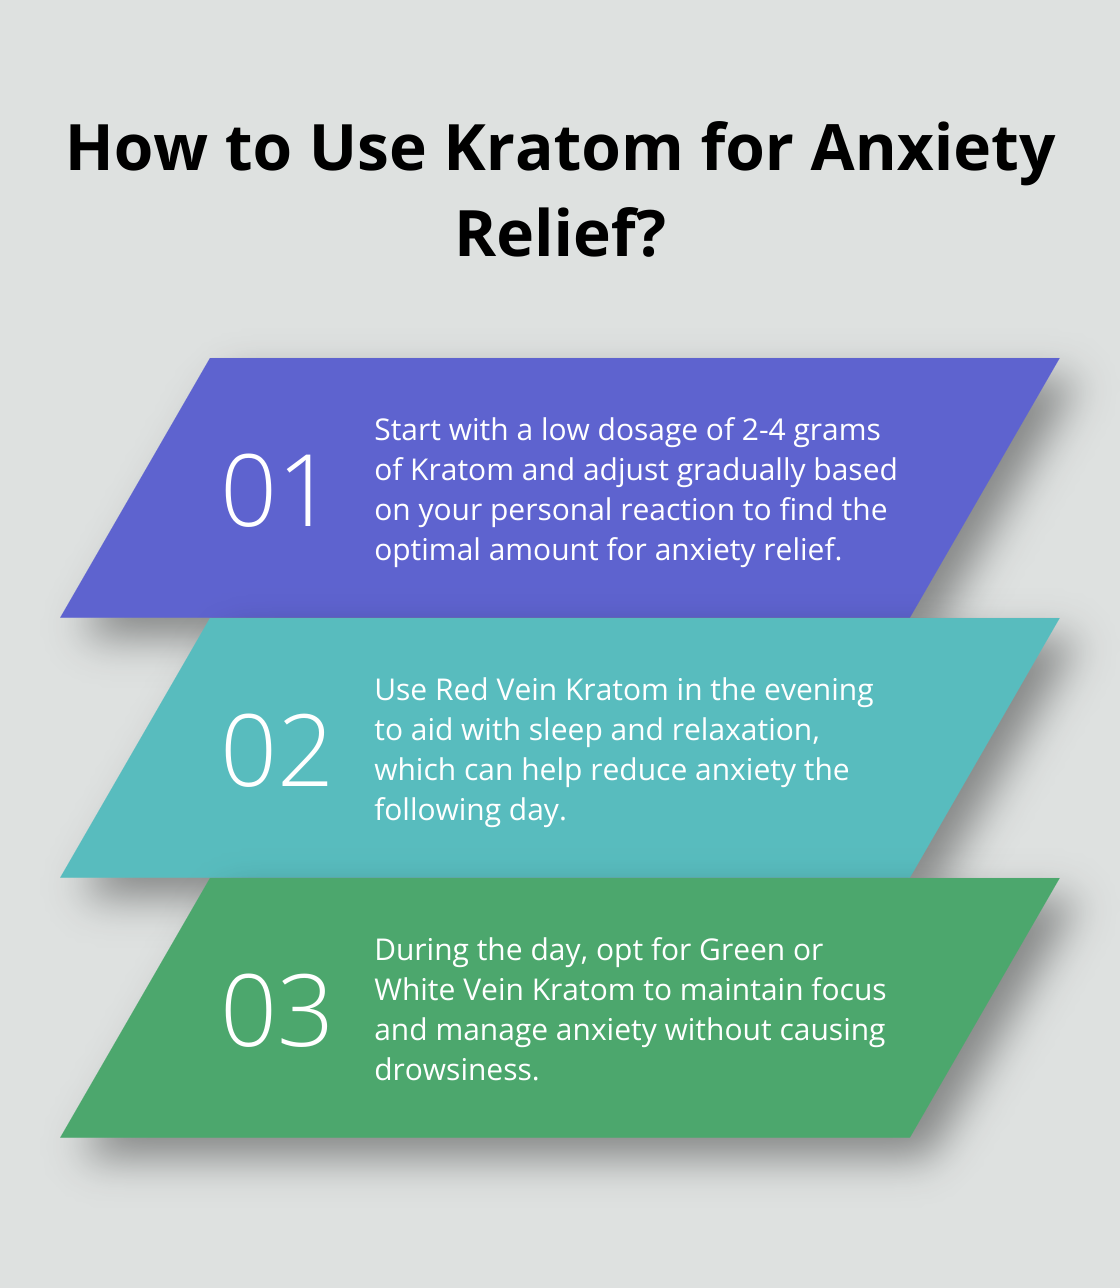 Fact - How to Use Kratom for Anxiety Relief?